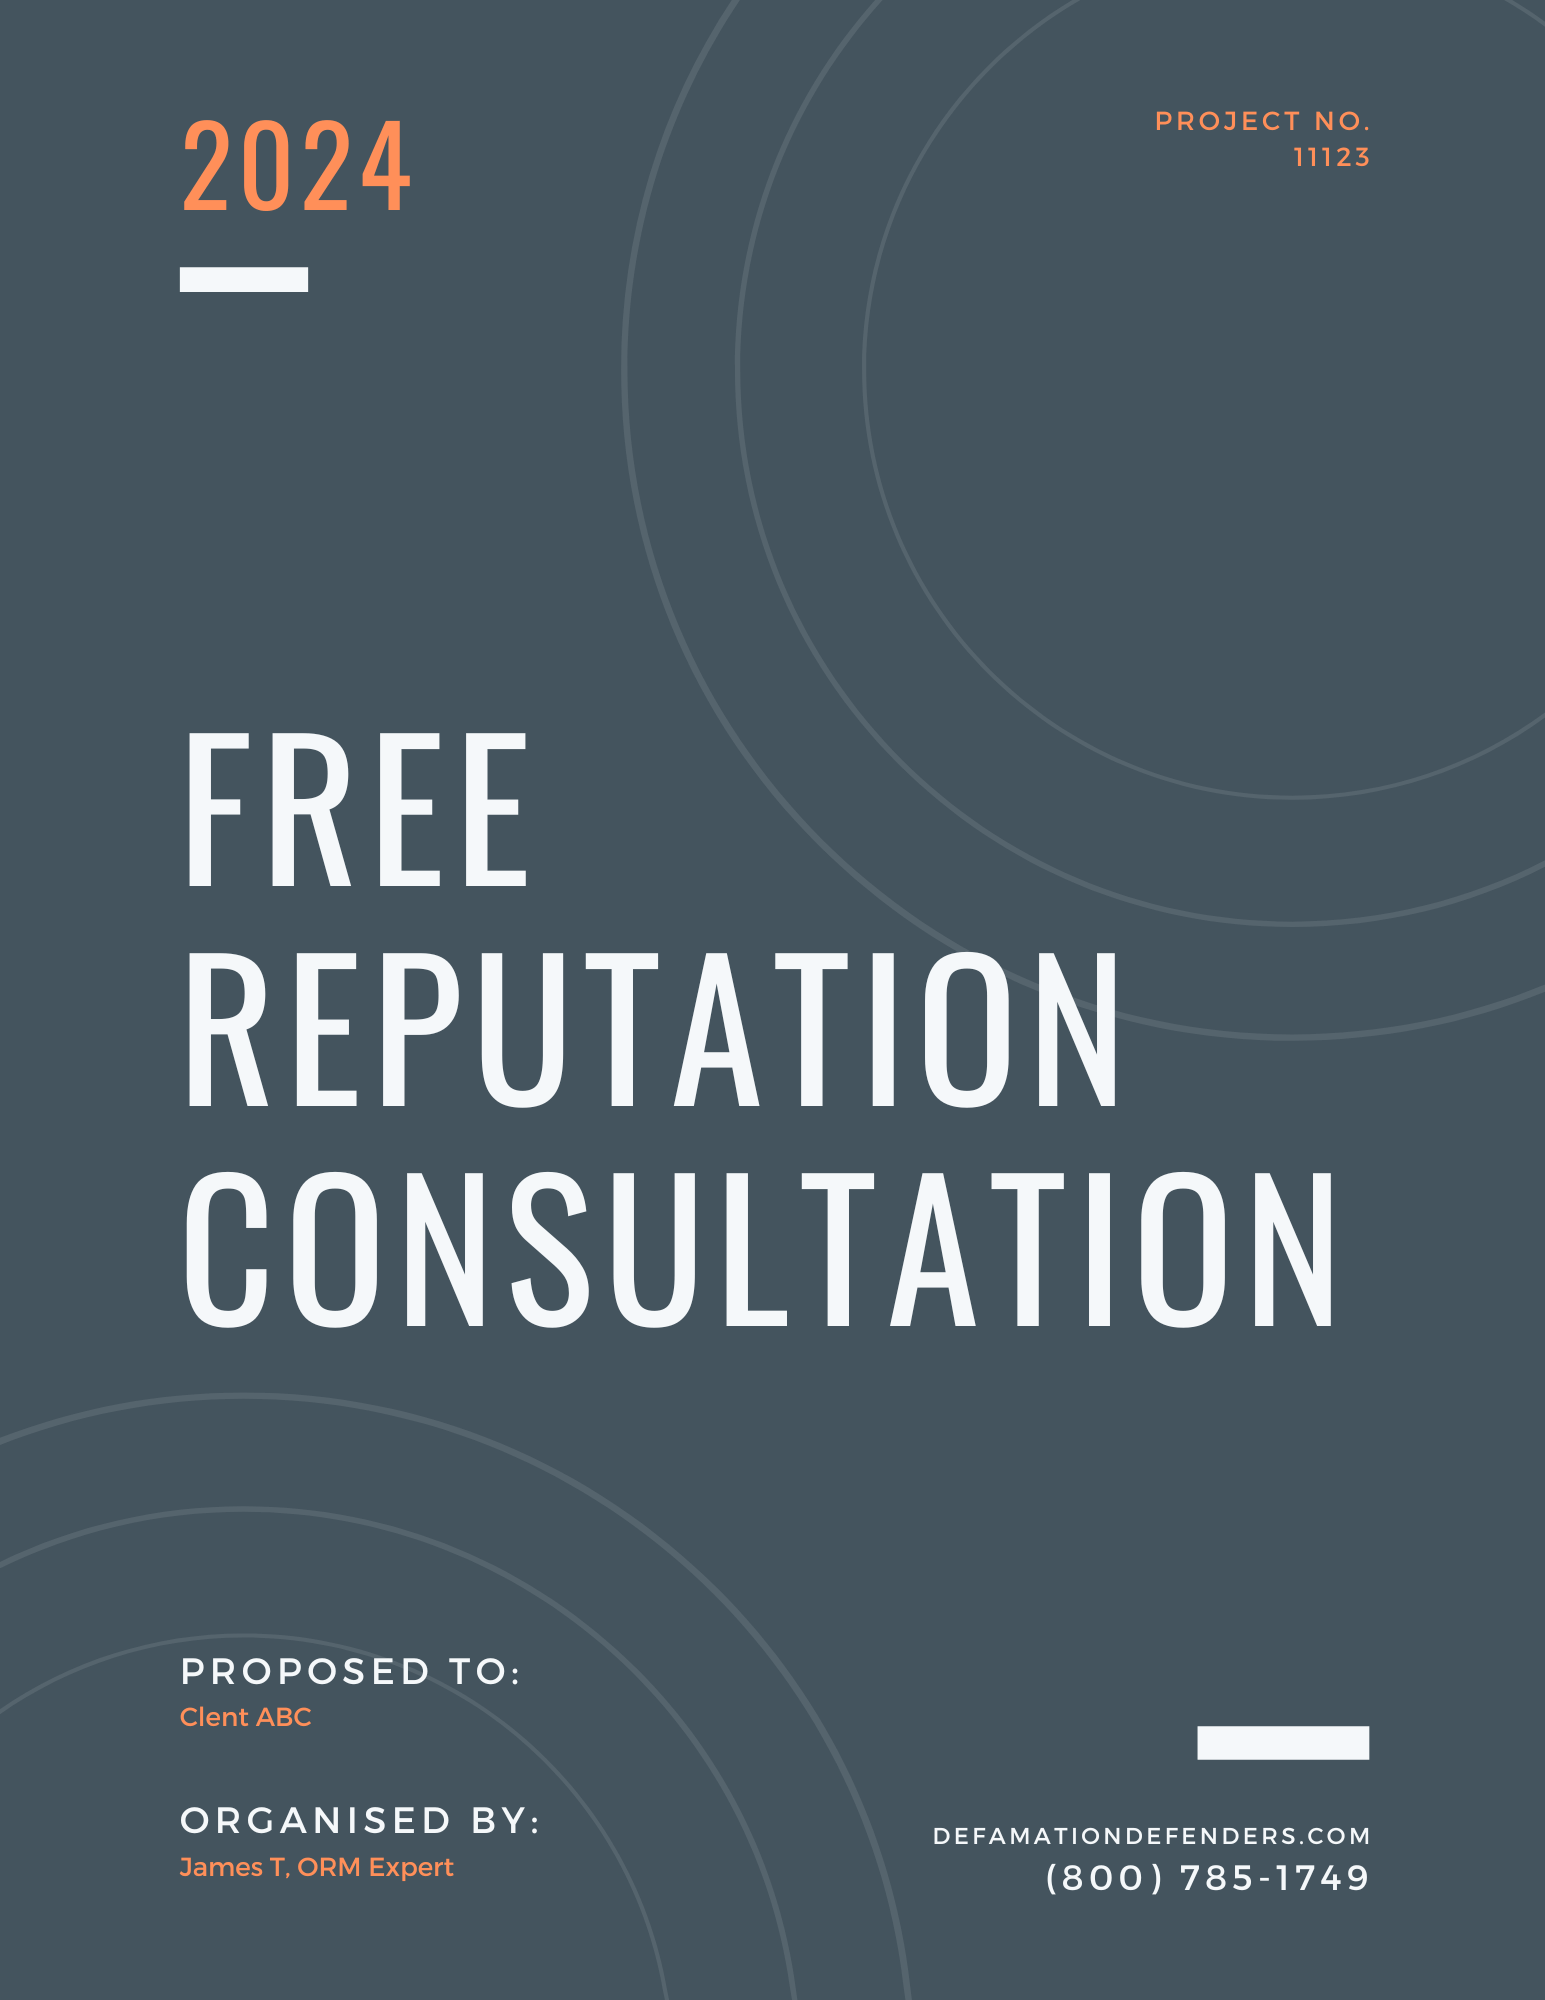 Free Online Reputation Analysis and Consultation